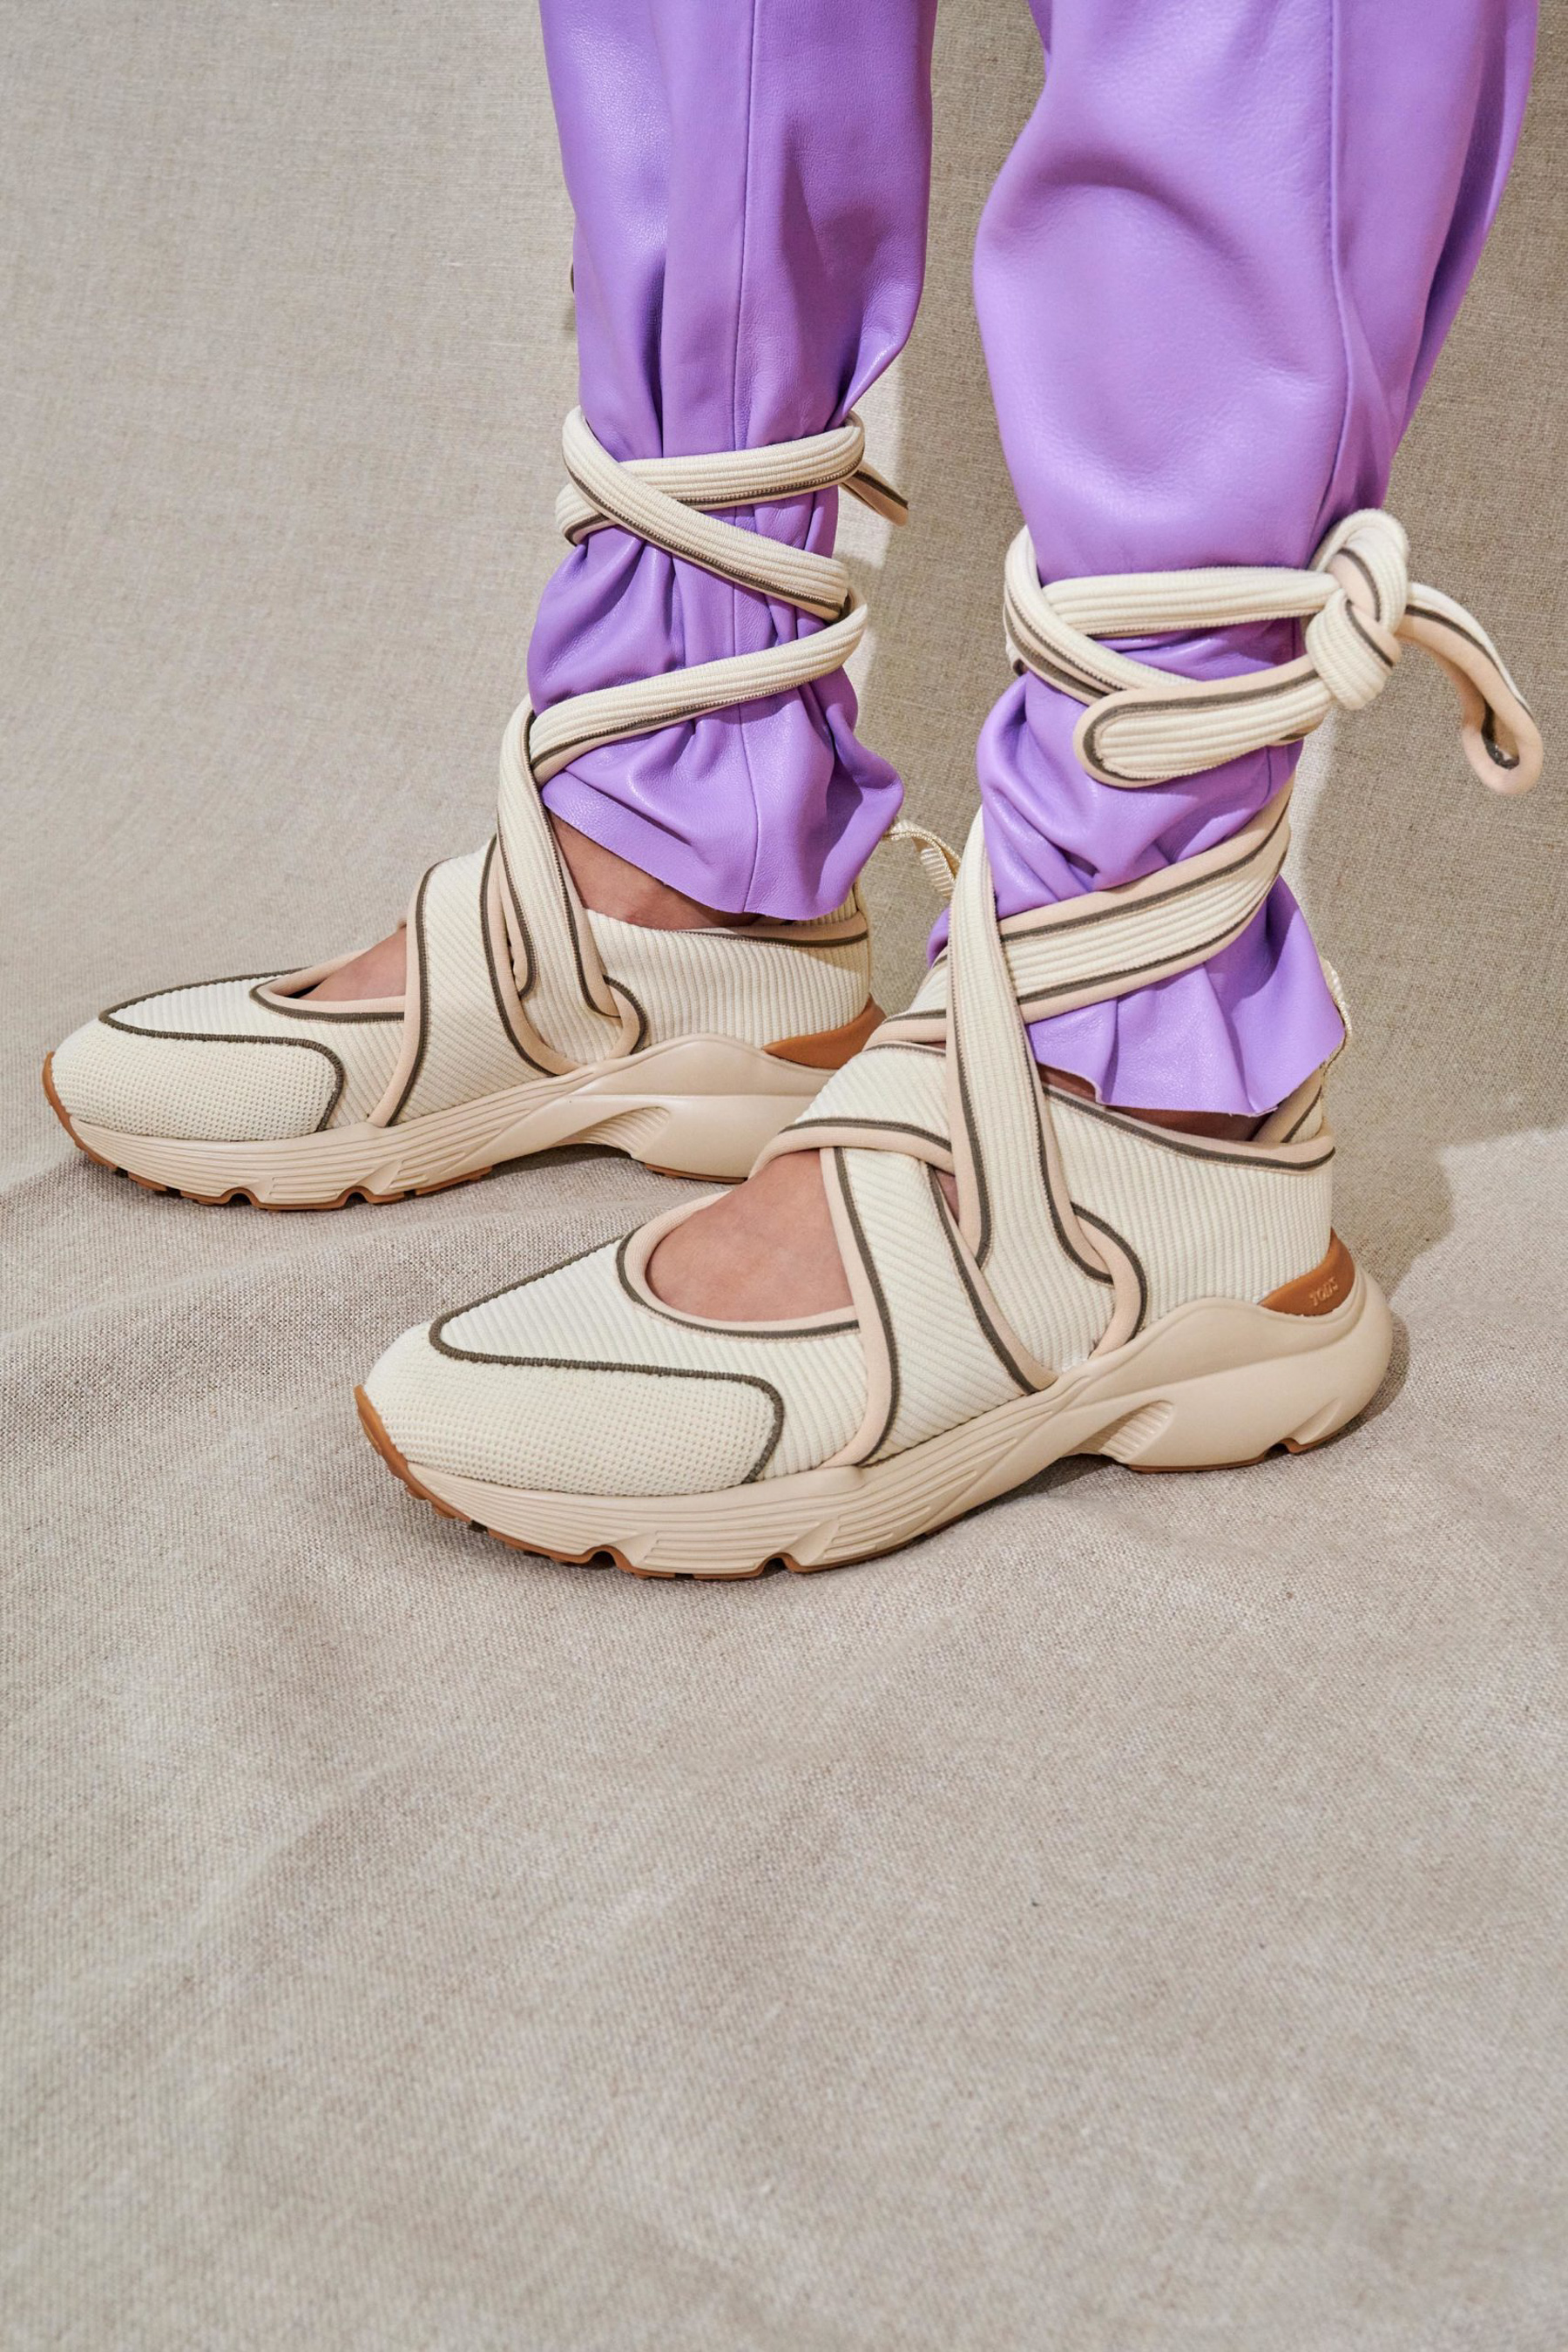 Tod's Spring 2021 Fashion Show Details | The Impression